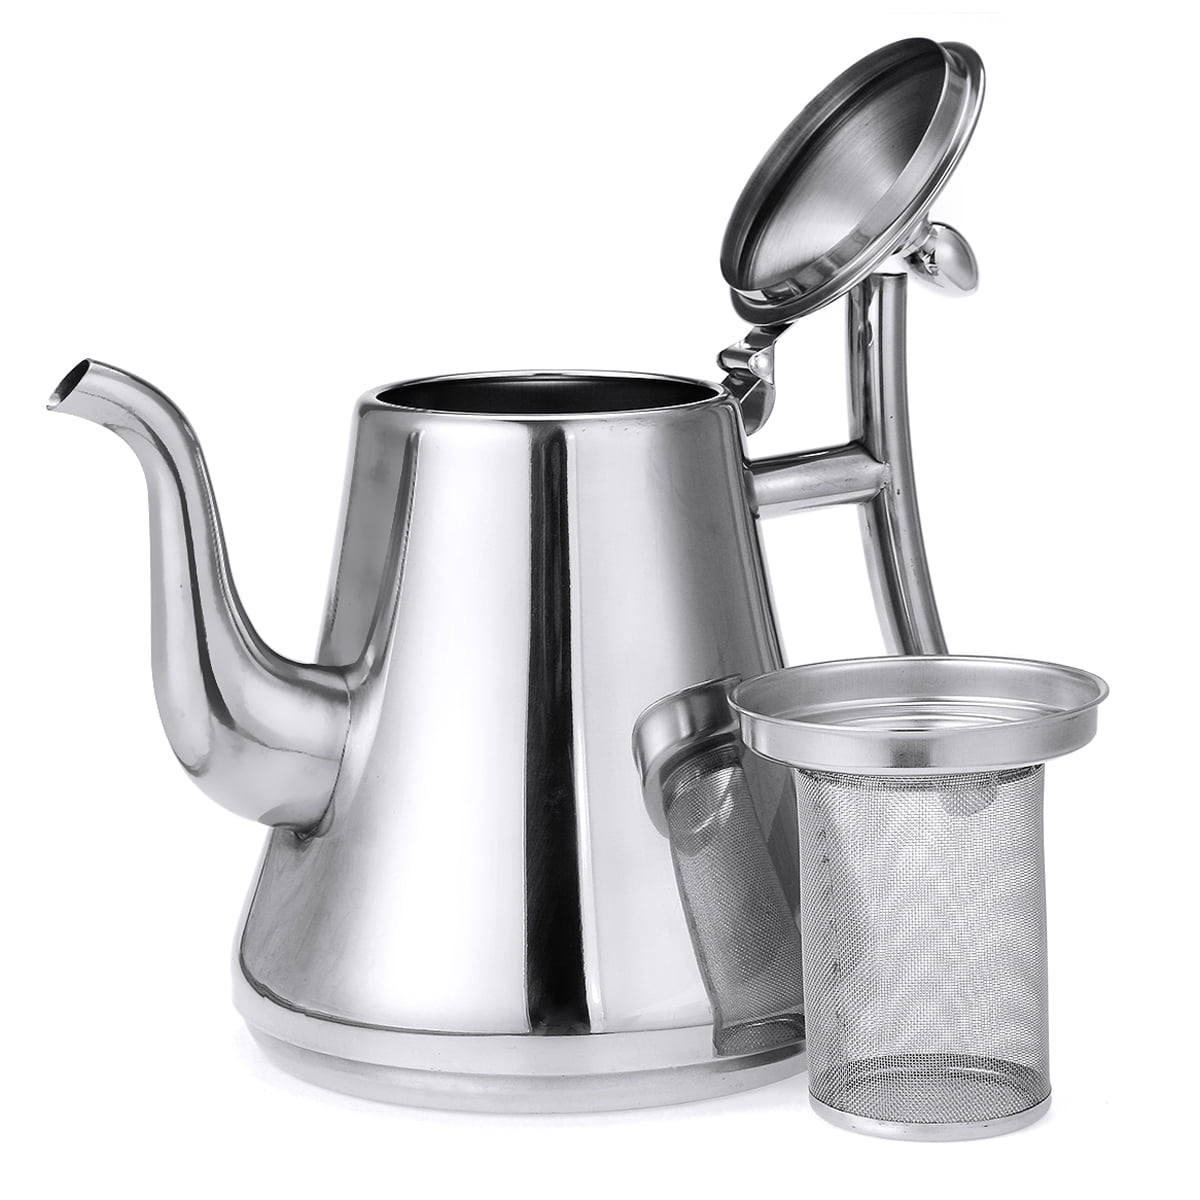 2L Stainless Steel Tea Pot Coffee Pot Gooseneck Kettle Moka Pot Espresso  Coffee Maker Stove With Removable Infuser Filter Home Office Camping Use